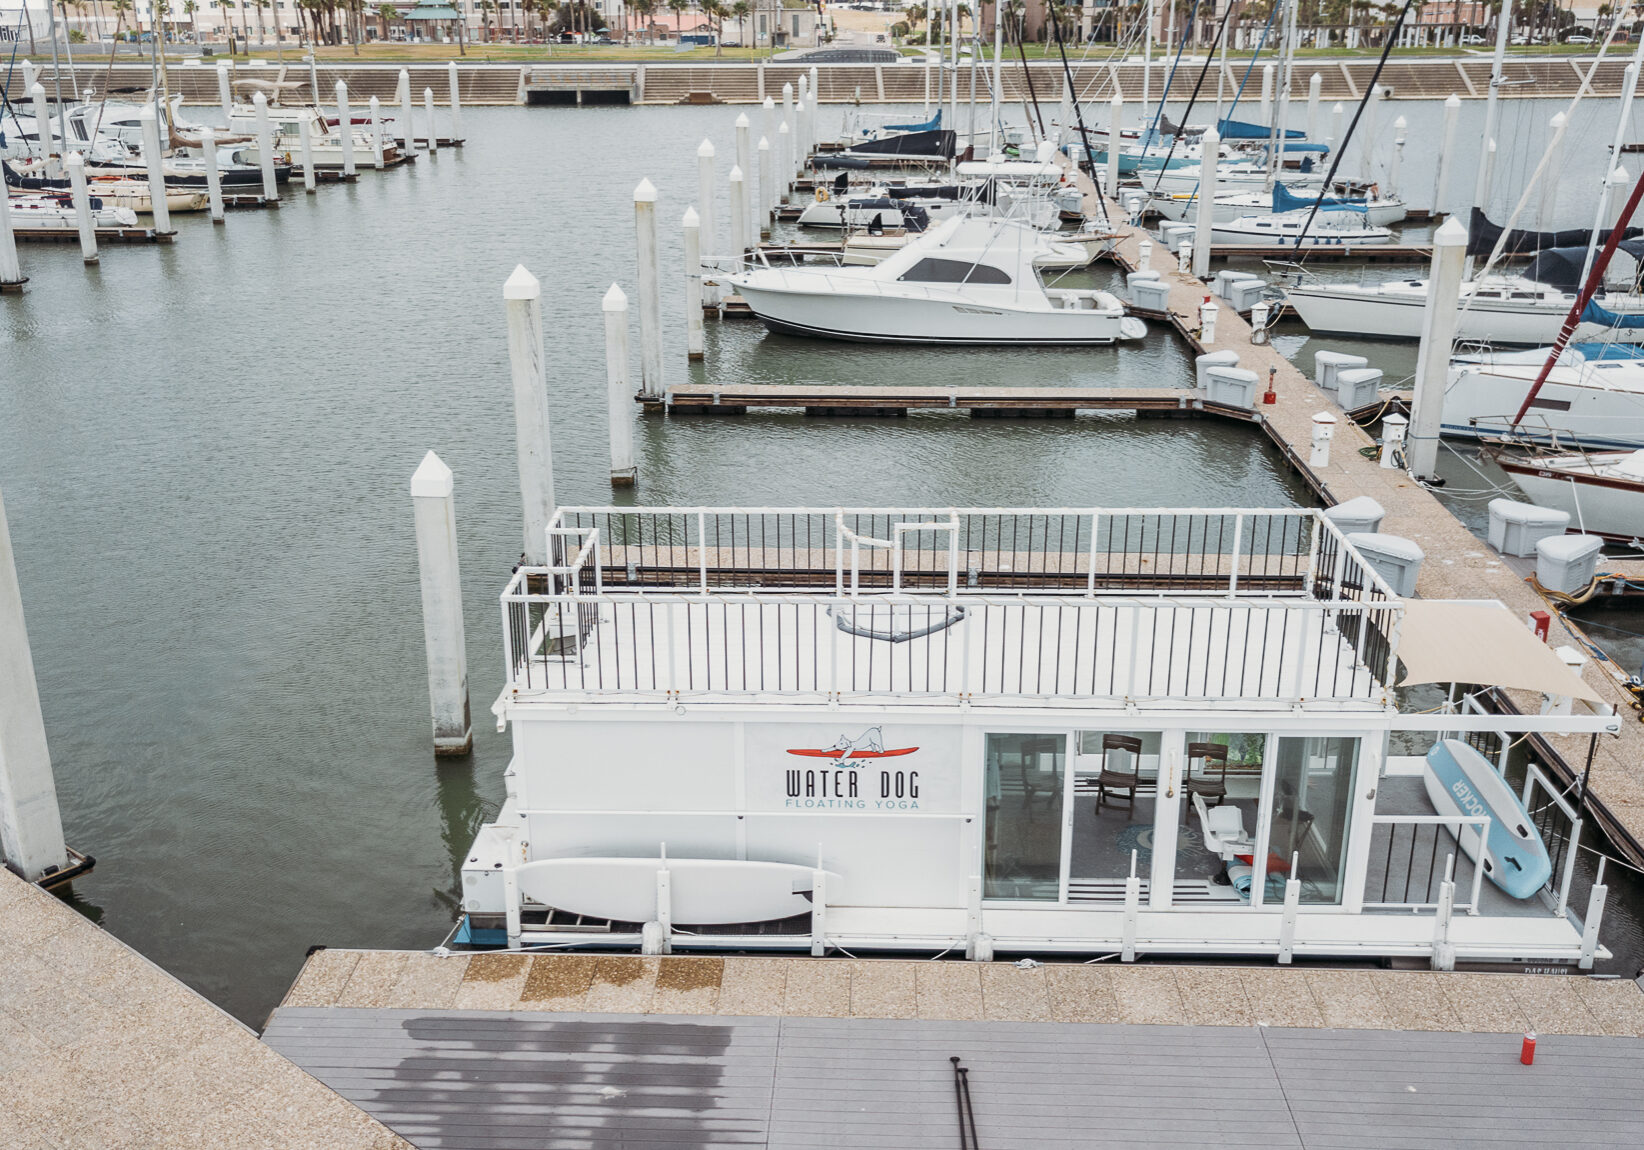 Yoga on the deck of the houseboat studio in the Corpus Christi Marina